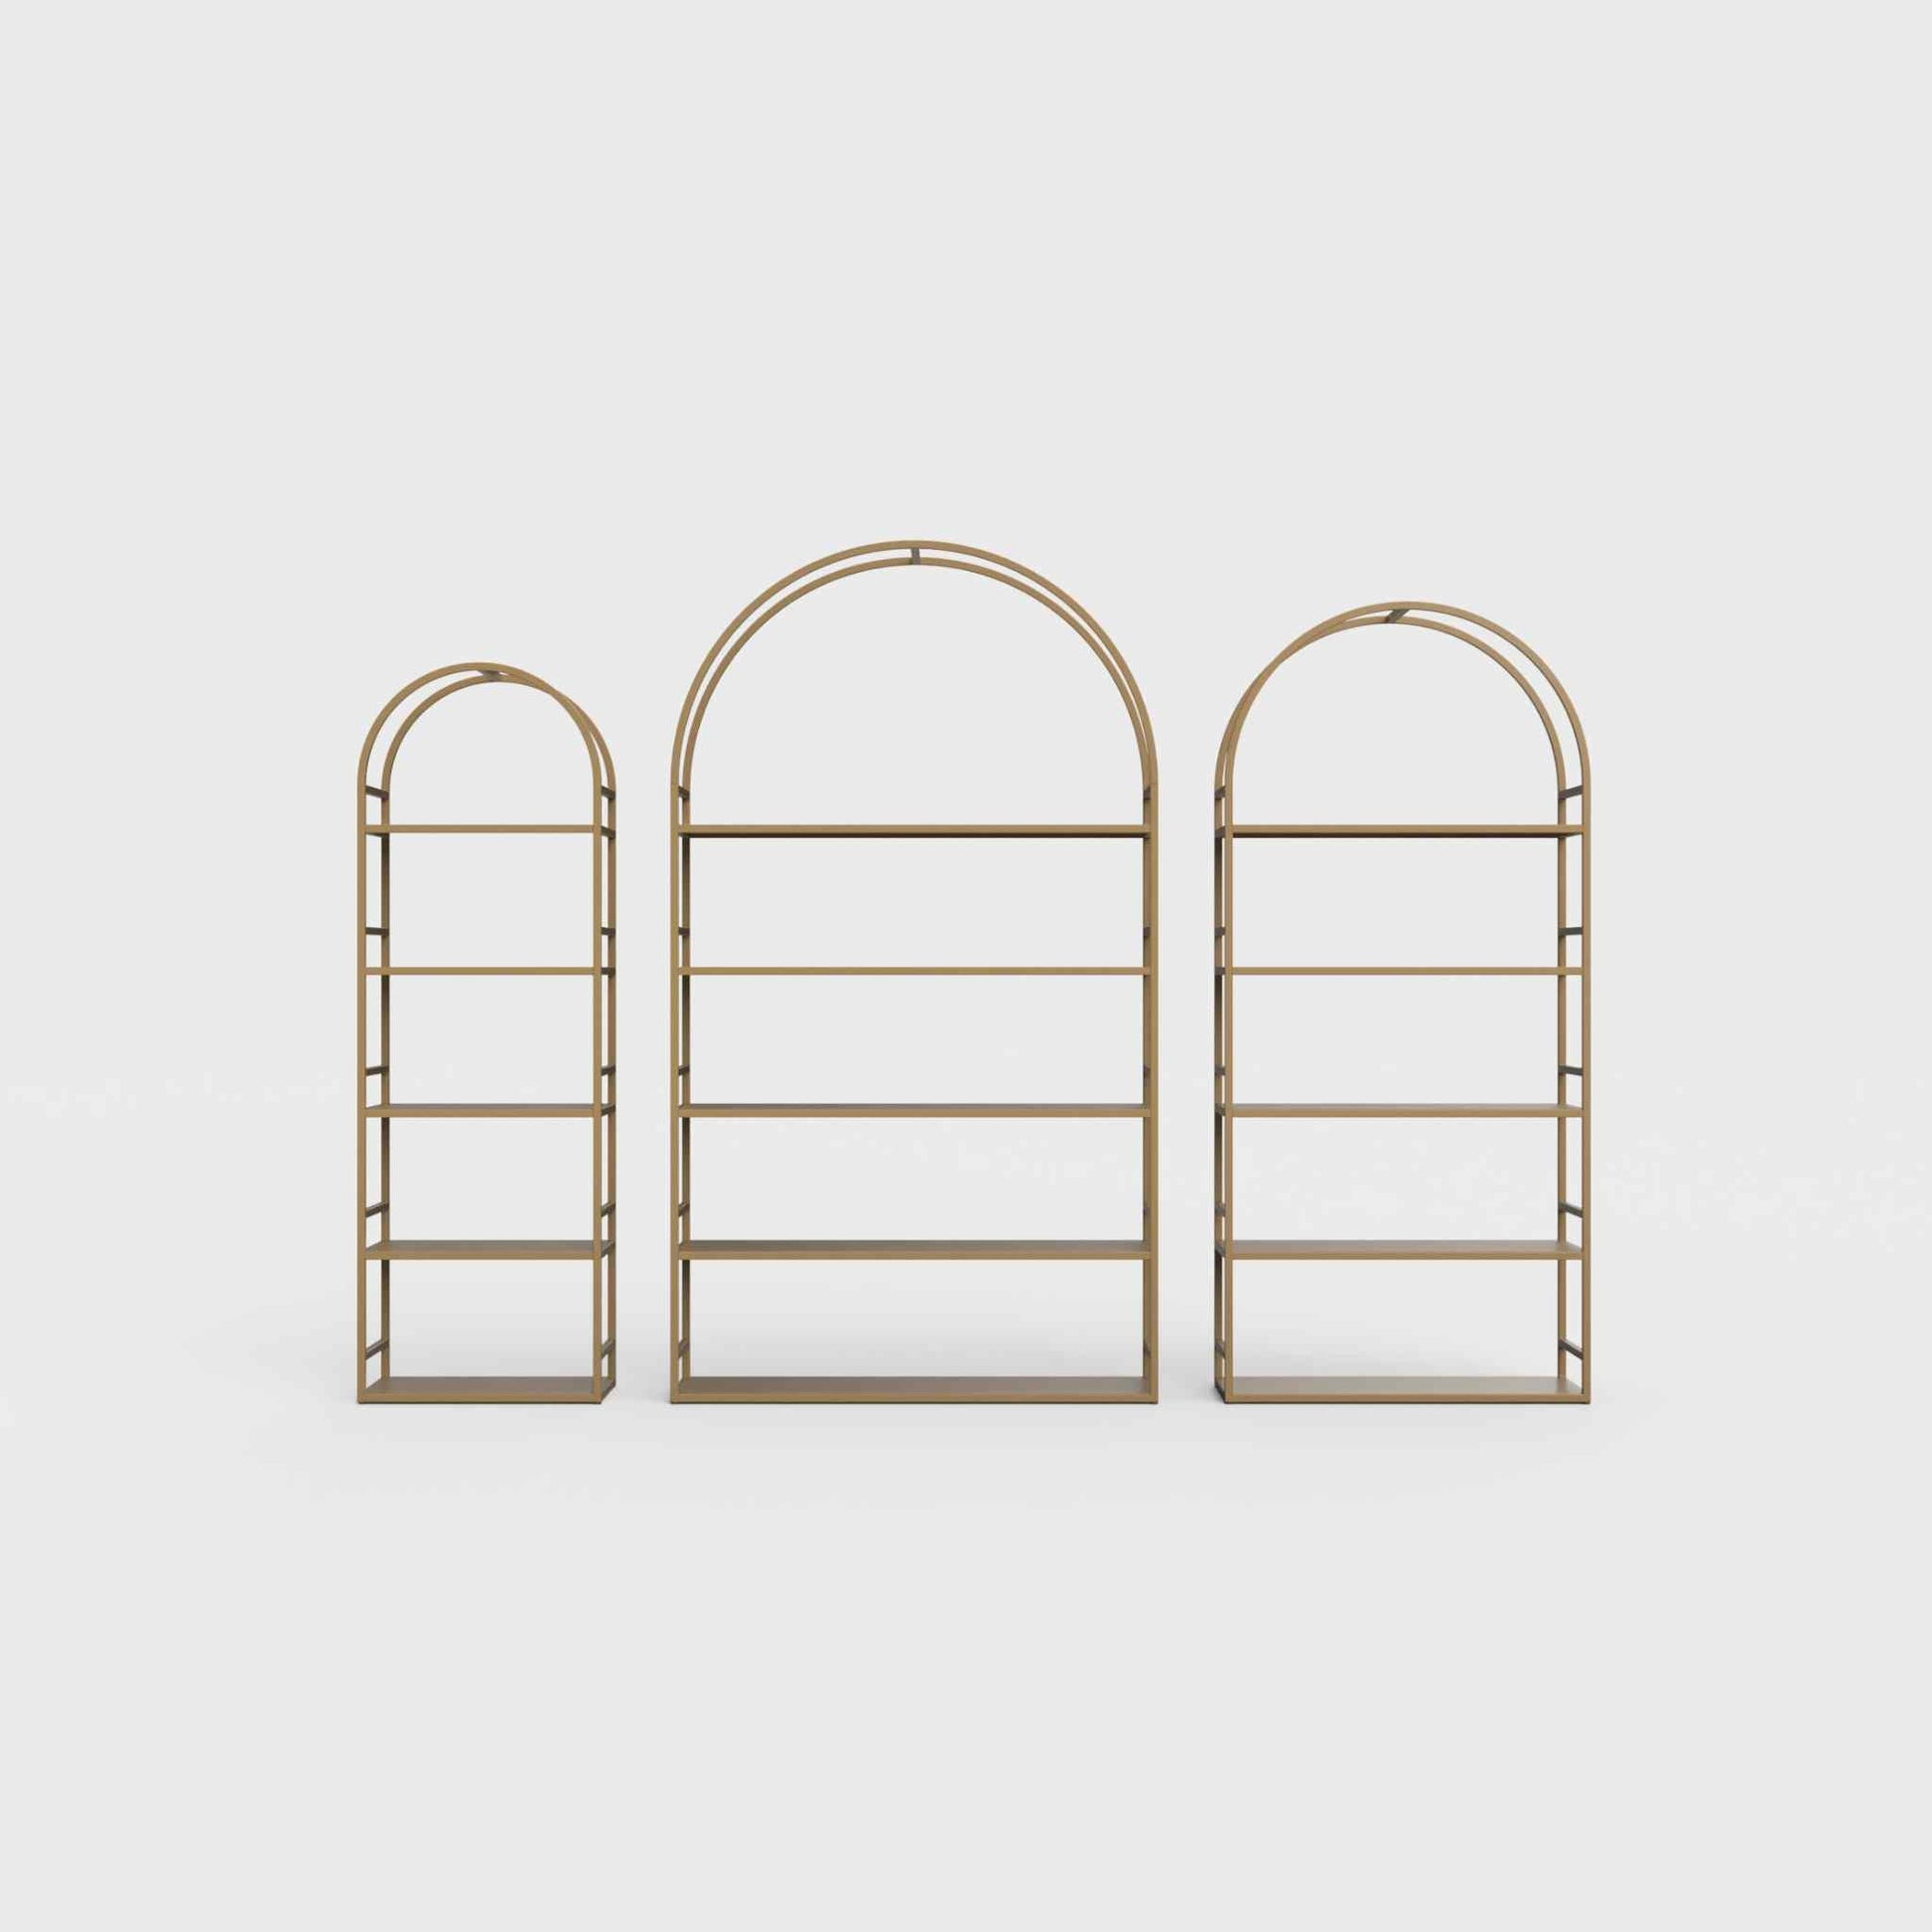 Arched bookcase Arkada, available in Switzerland through ÉTAUDORÉ, made from highest quality powdered coated steel in desert palm color